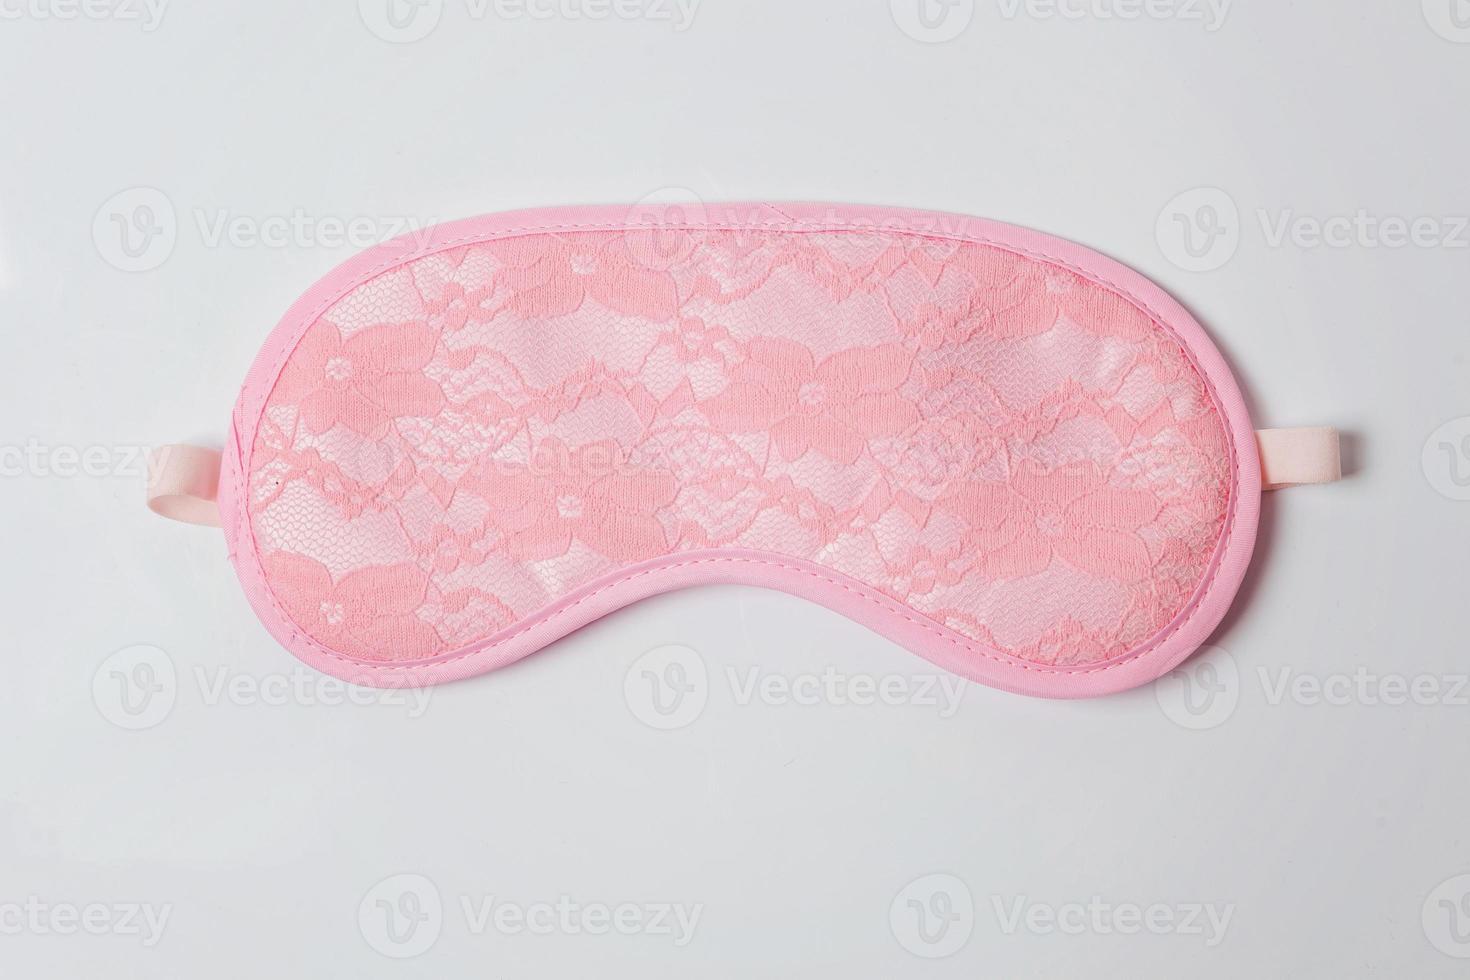 Sleeping eye mask, isolated on white background. Do not disturb me, let me sleep. Rest, good night, insomnia, relaxation, tired, travel concept. photo